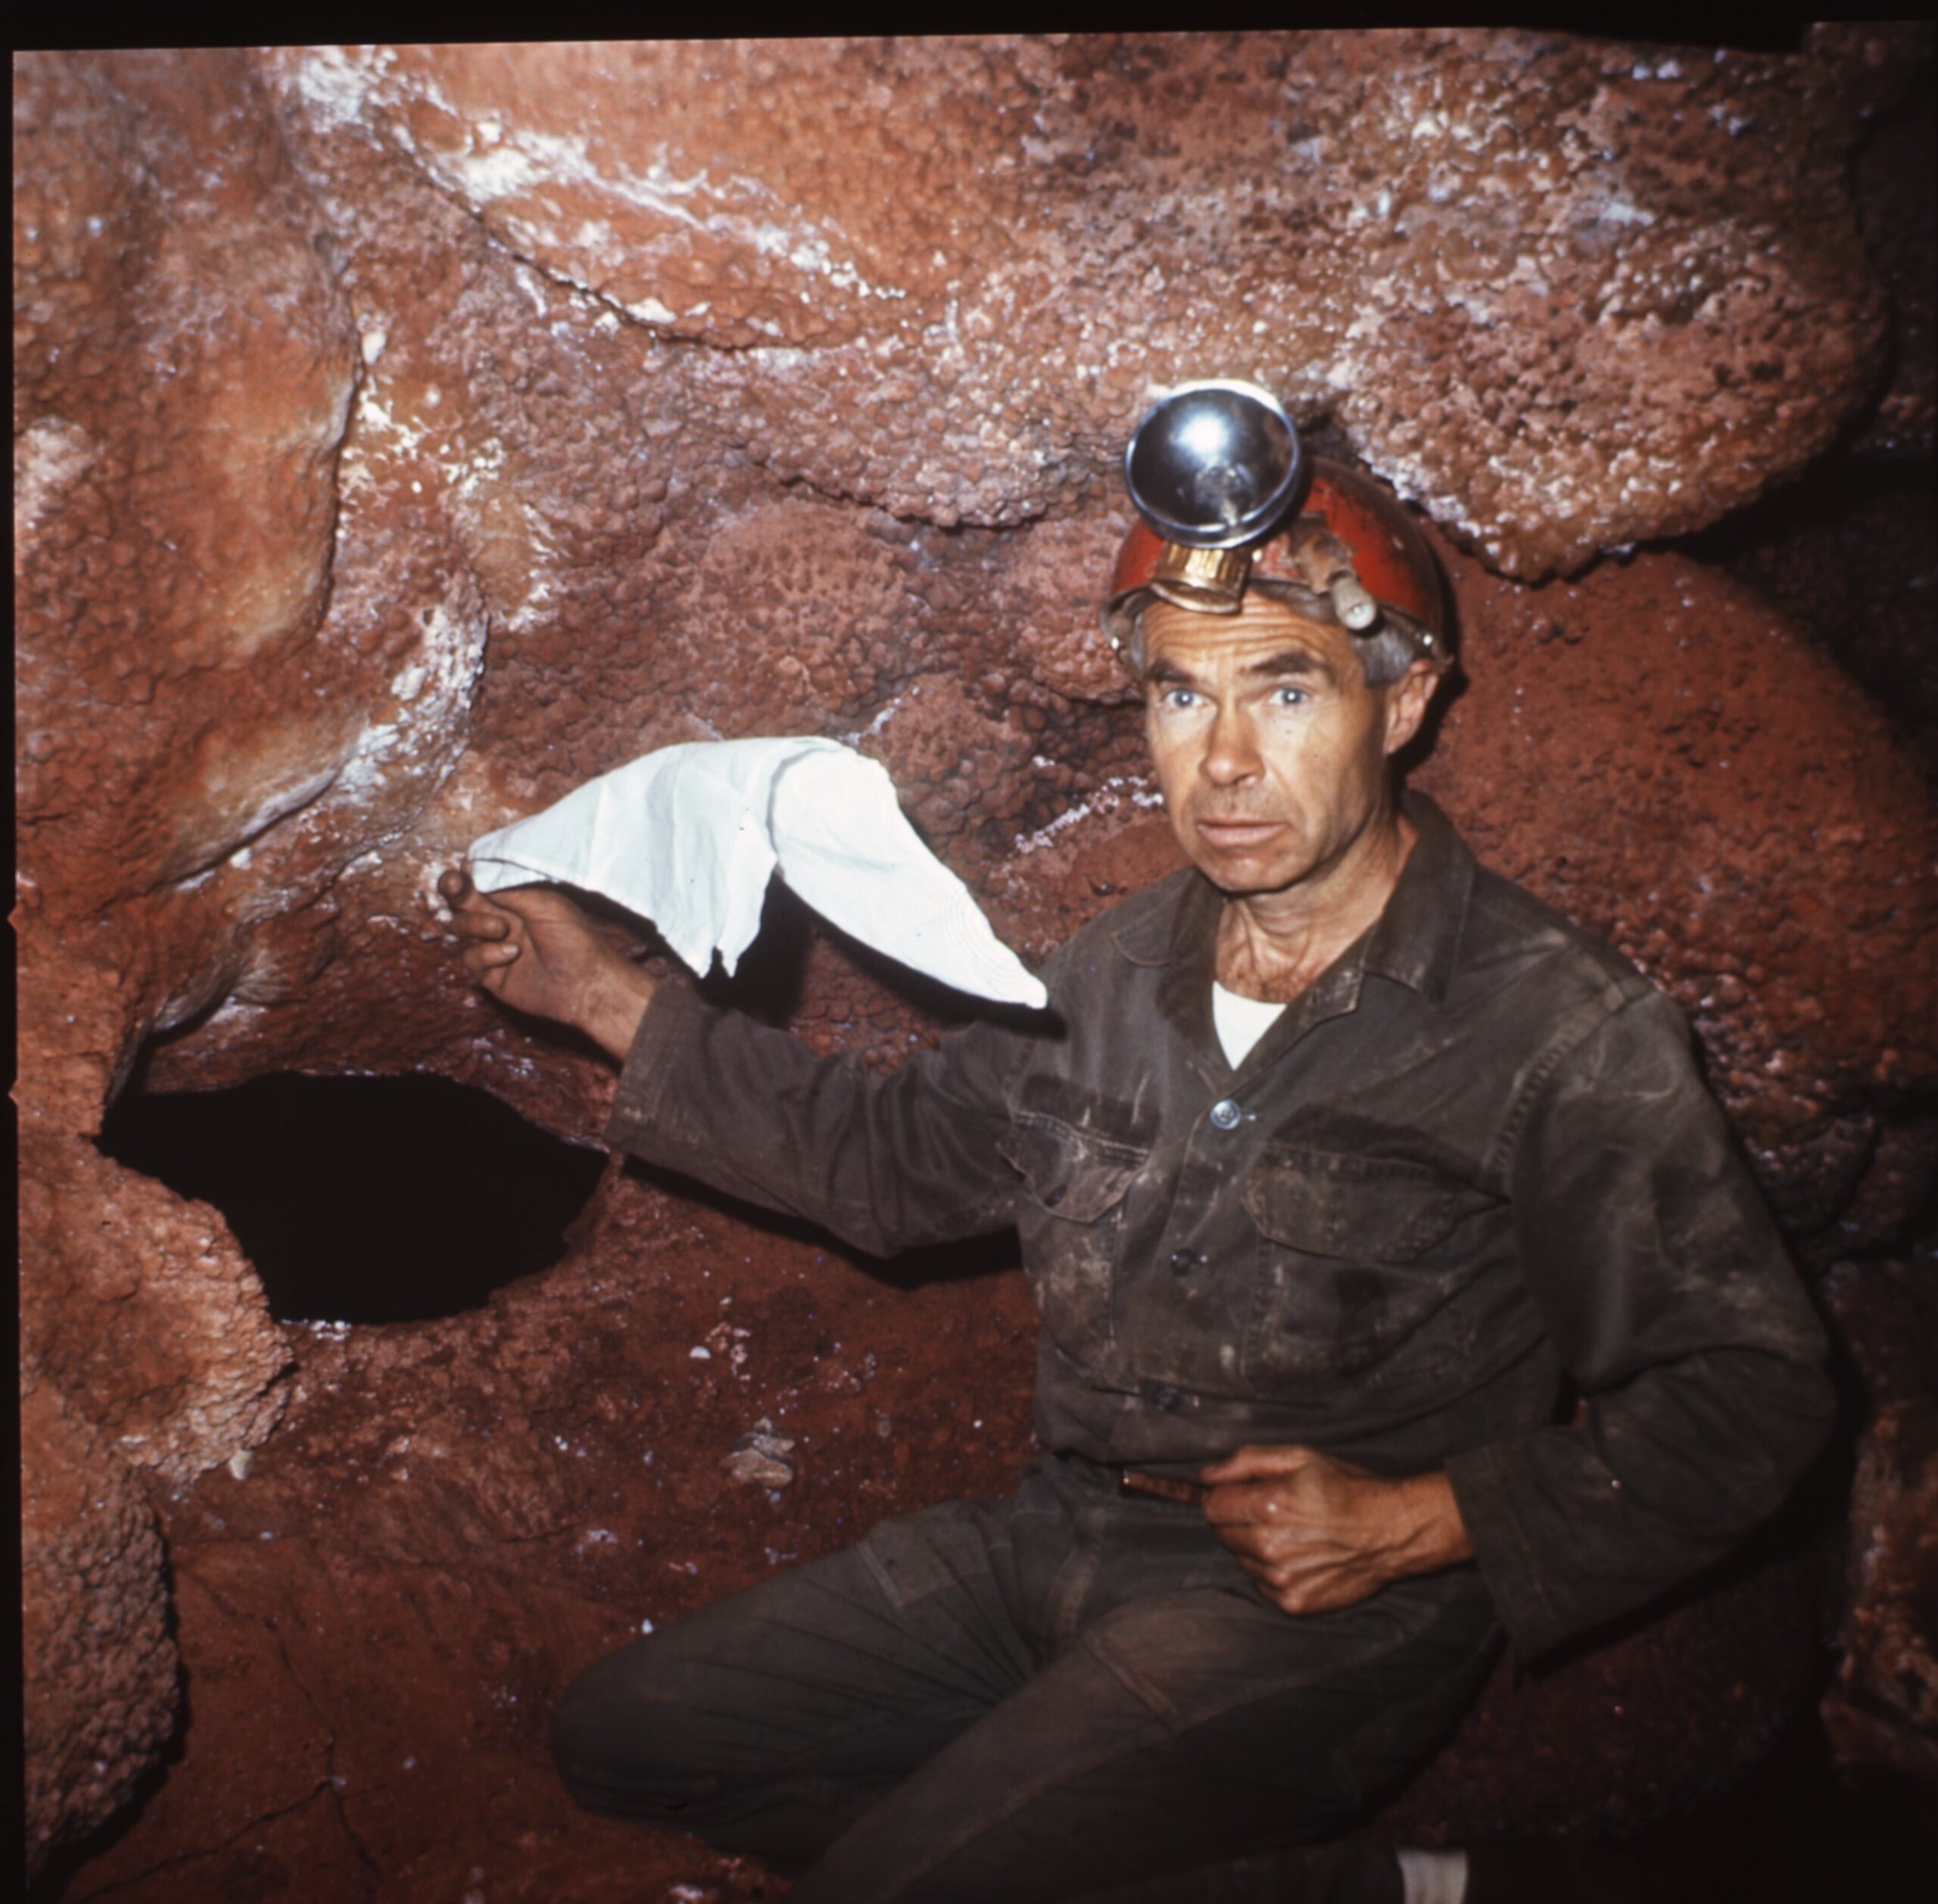 ADMINISTRATIVE HISTORY OF JEWEL CAVE NATIONAL MONUMENT